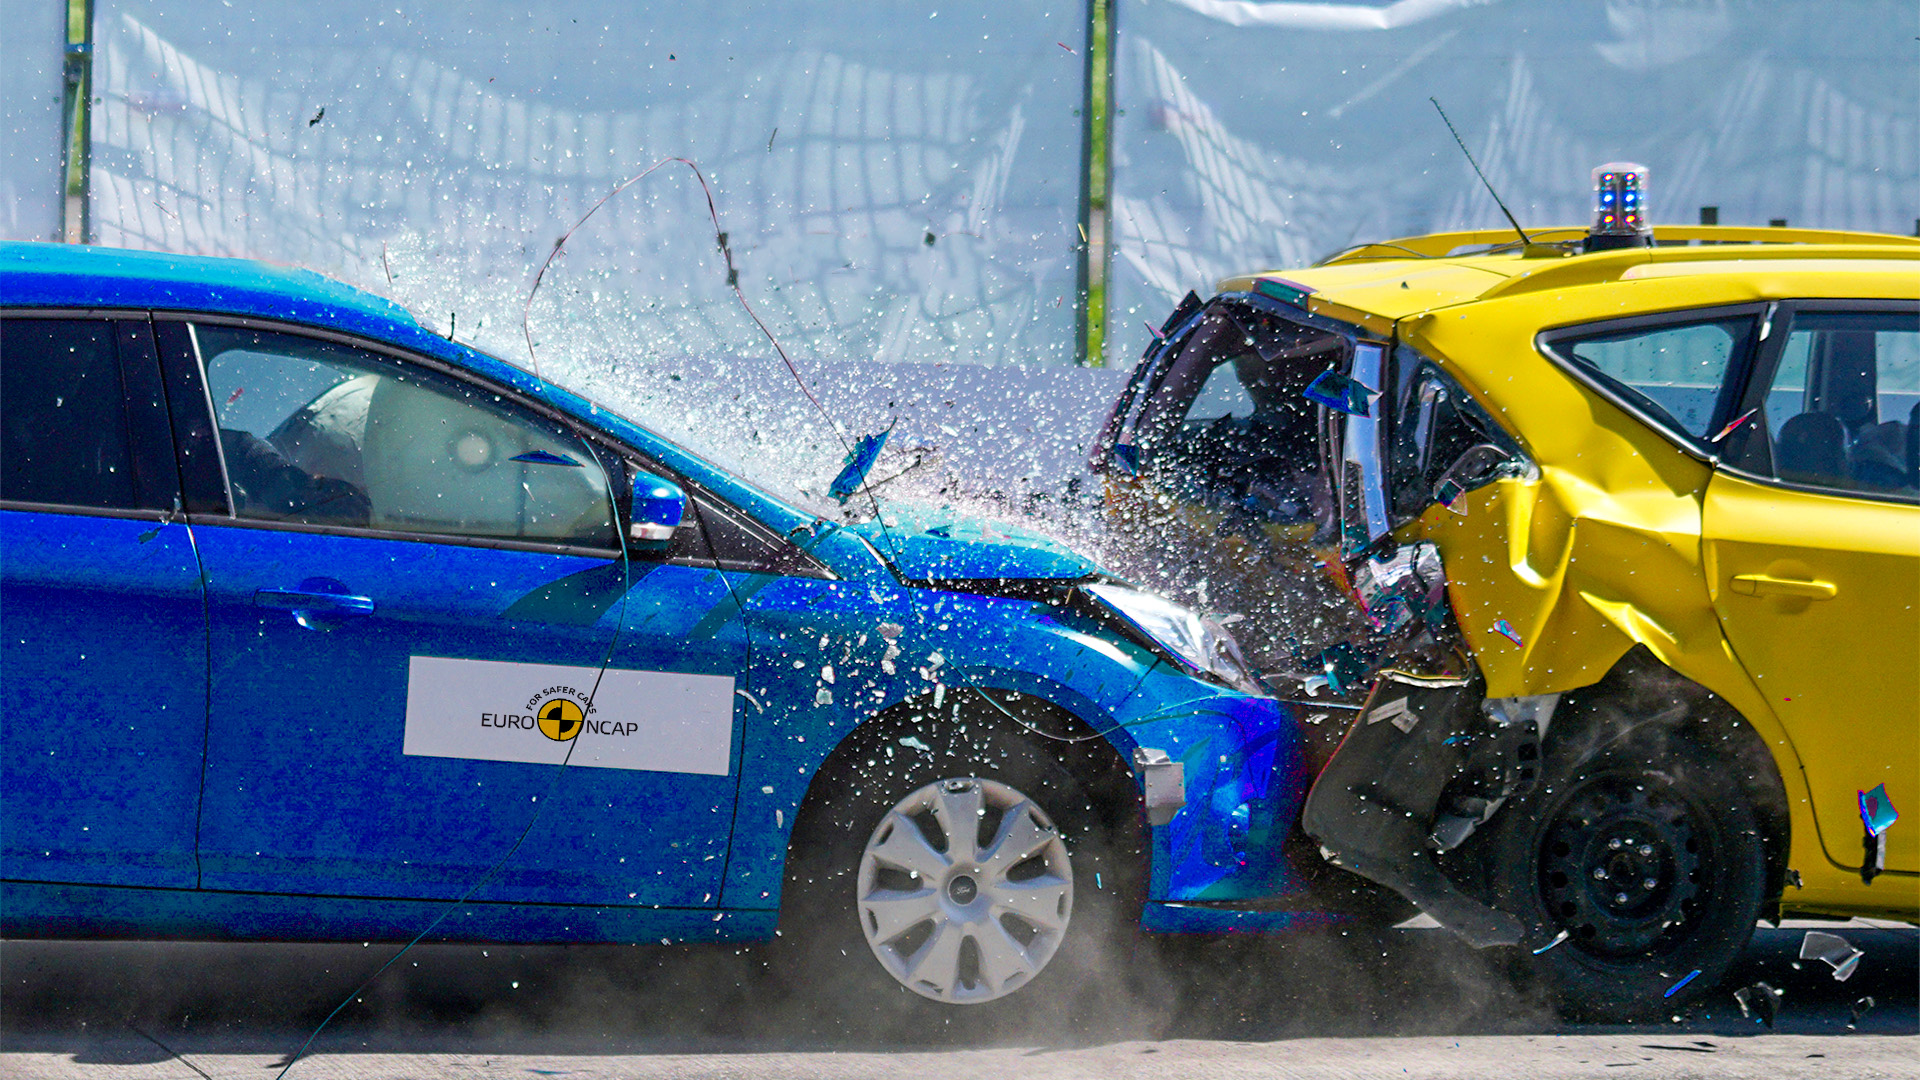 NCAP levels and your fleet - what you need to know_Featured blog image_Rev 2